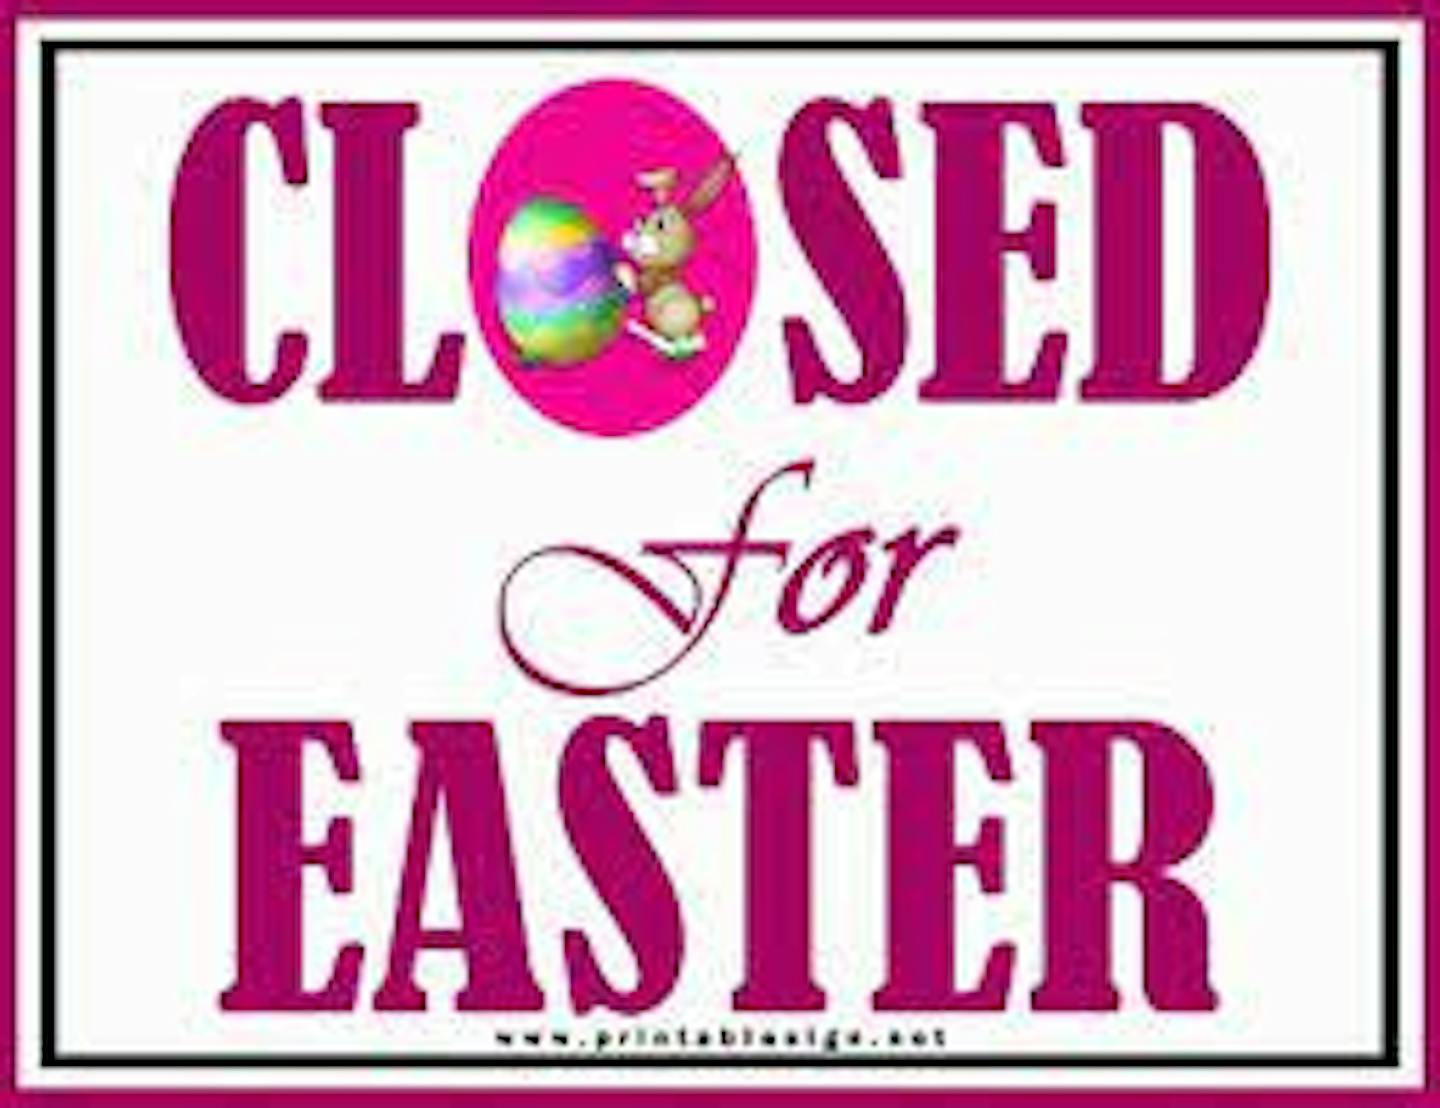 closed for easter